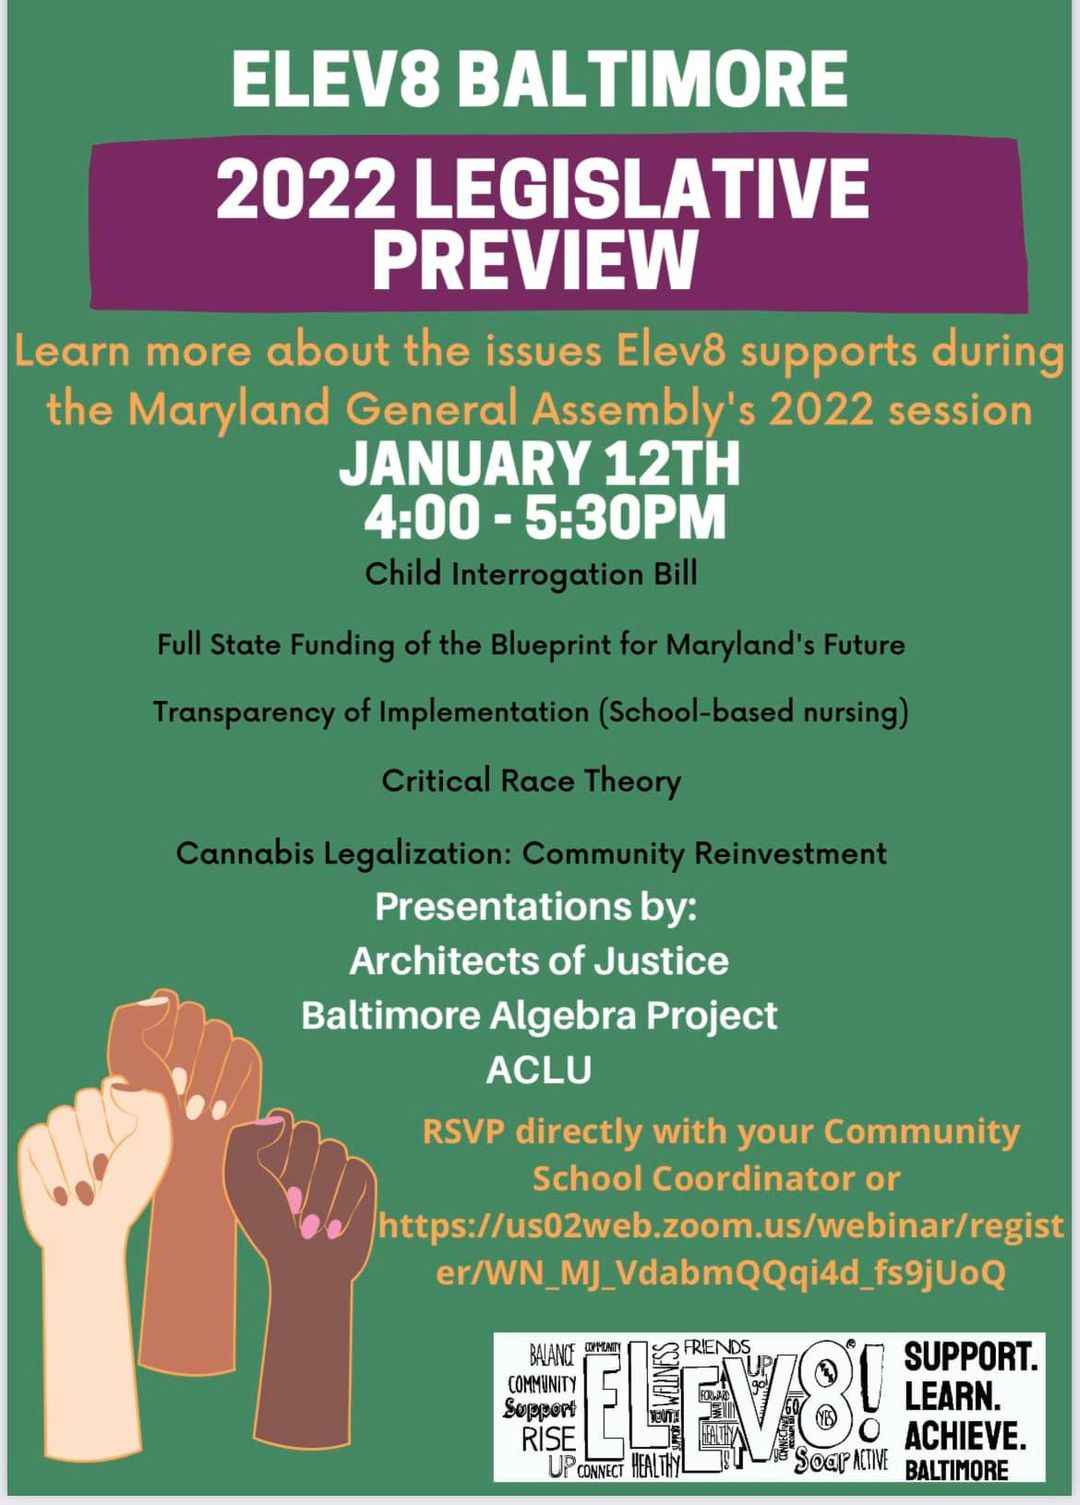 Green background. Text says, "Elev8 Baltimore 2022 Legislative Preview. January 12, 4-5:30pm. Learn more about the issues Elev8 supports during the Maryland General Assembly's 2022 session."